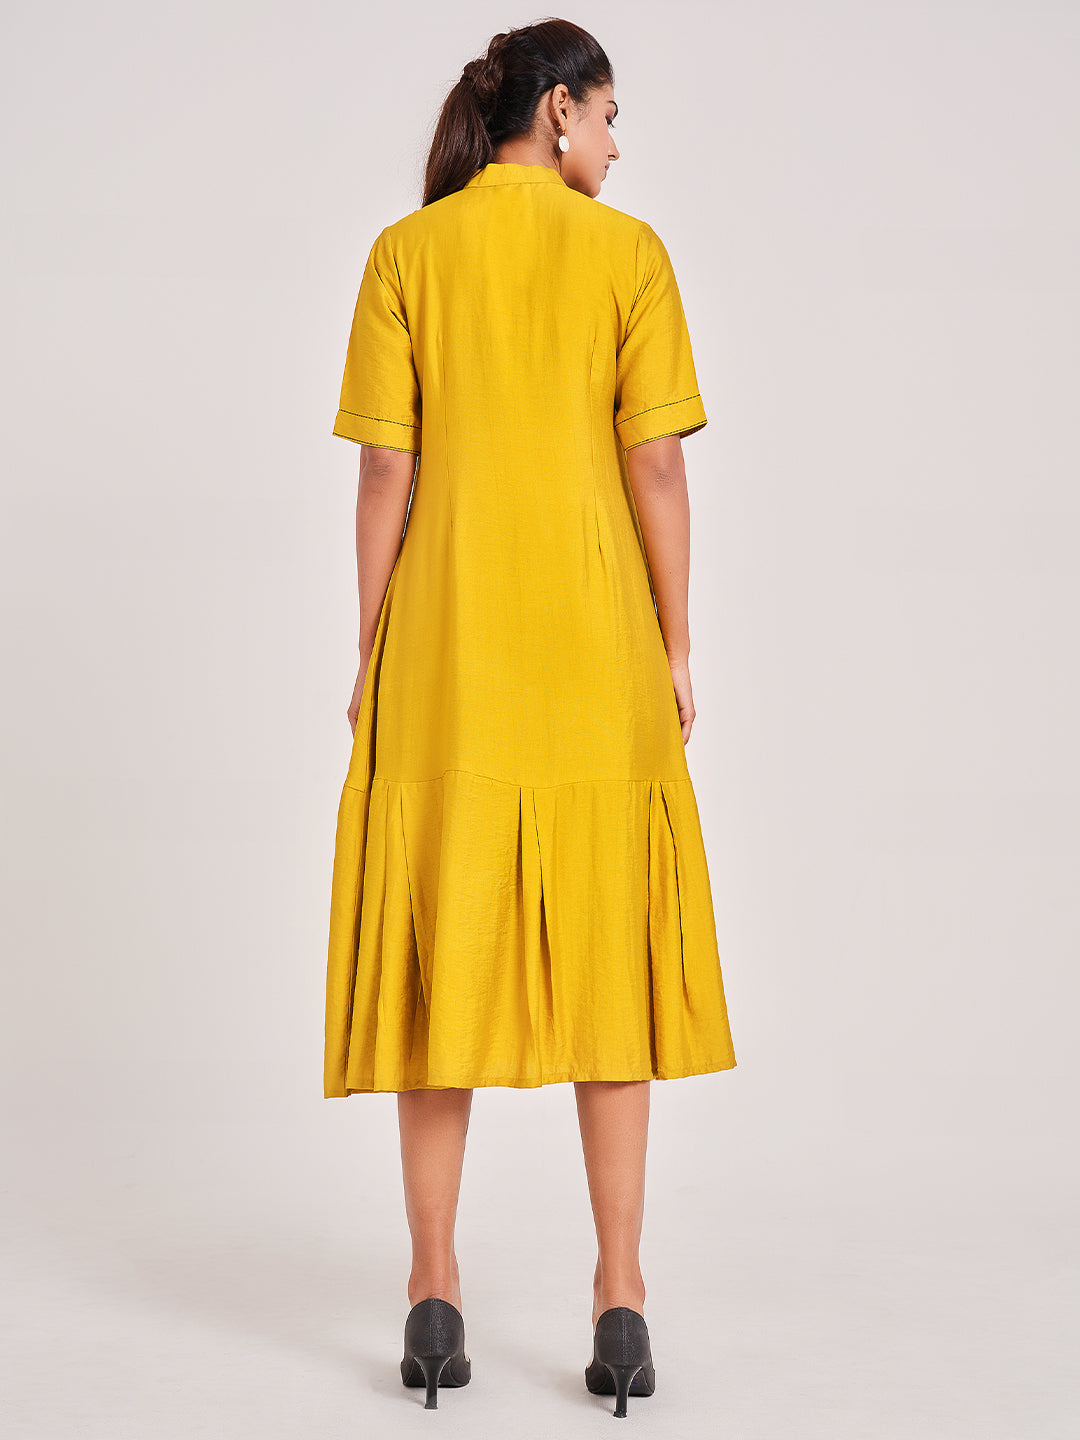 Yellow Leather Patch Work Dress - ARH947